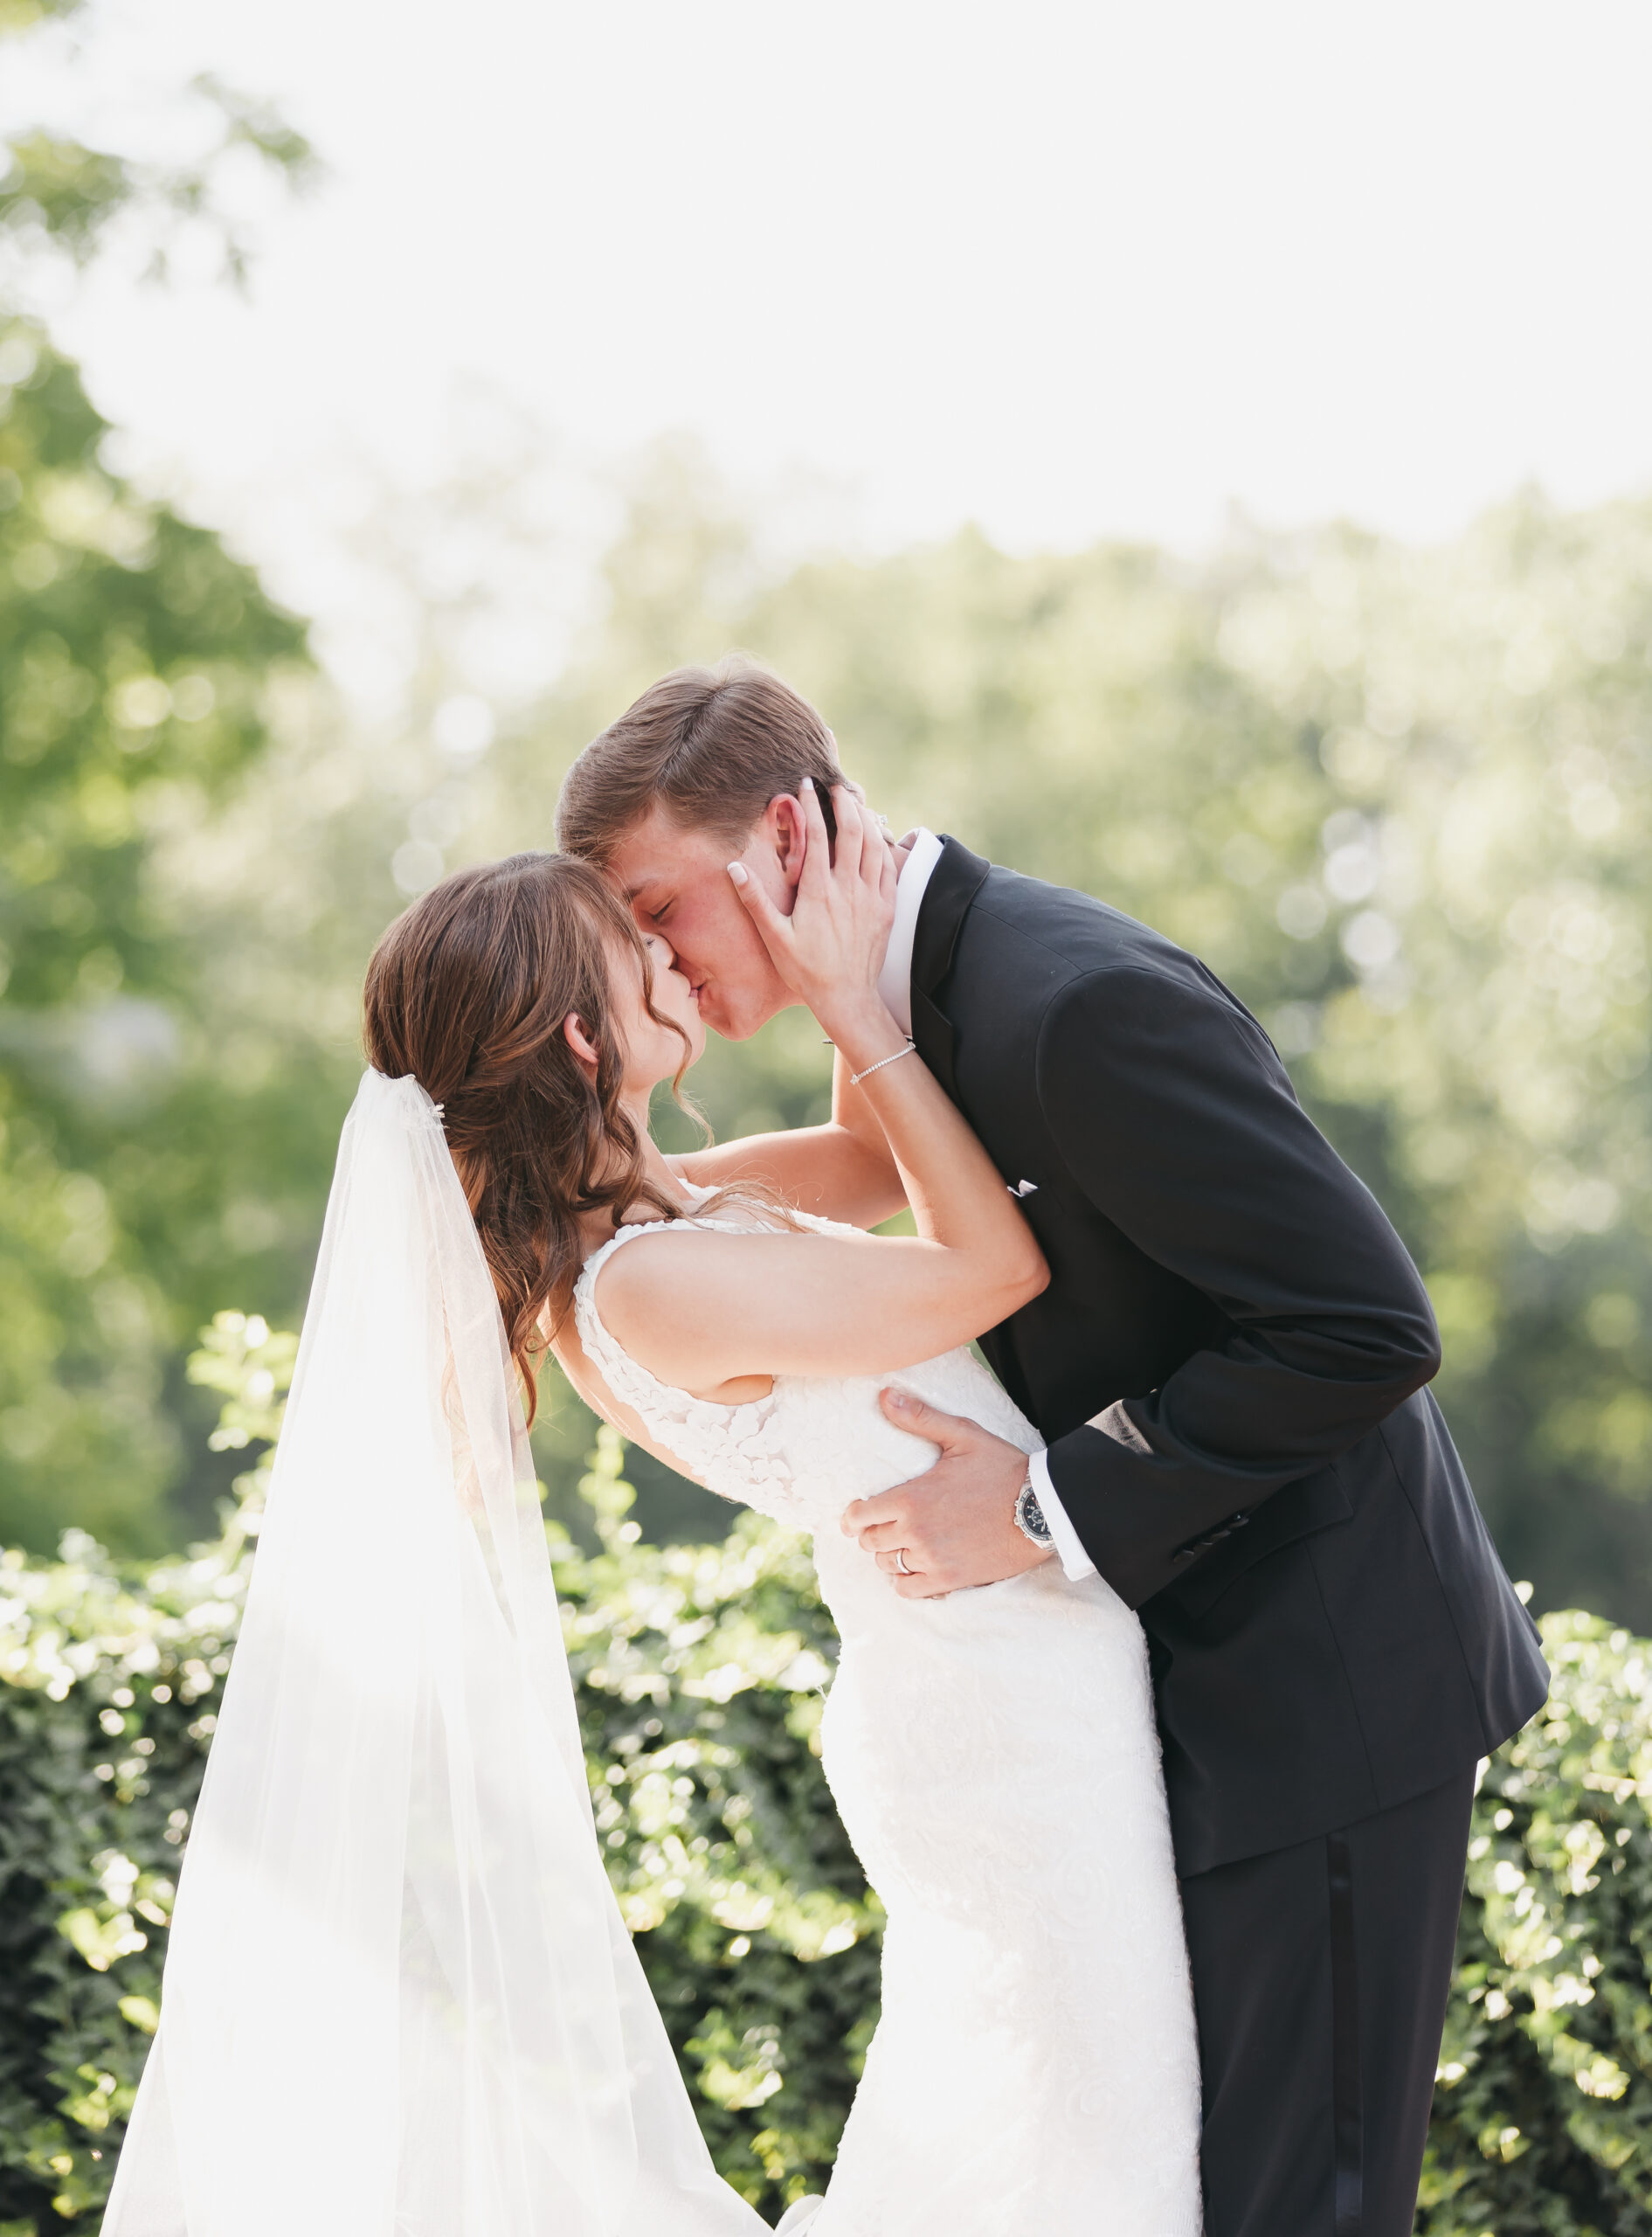 How To Find The Perfect Loudon County Wedding Photographer. Couple sharing a kiss during their wedding shoot.